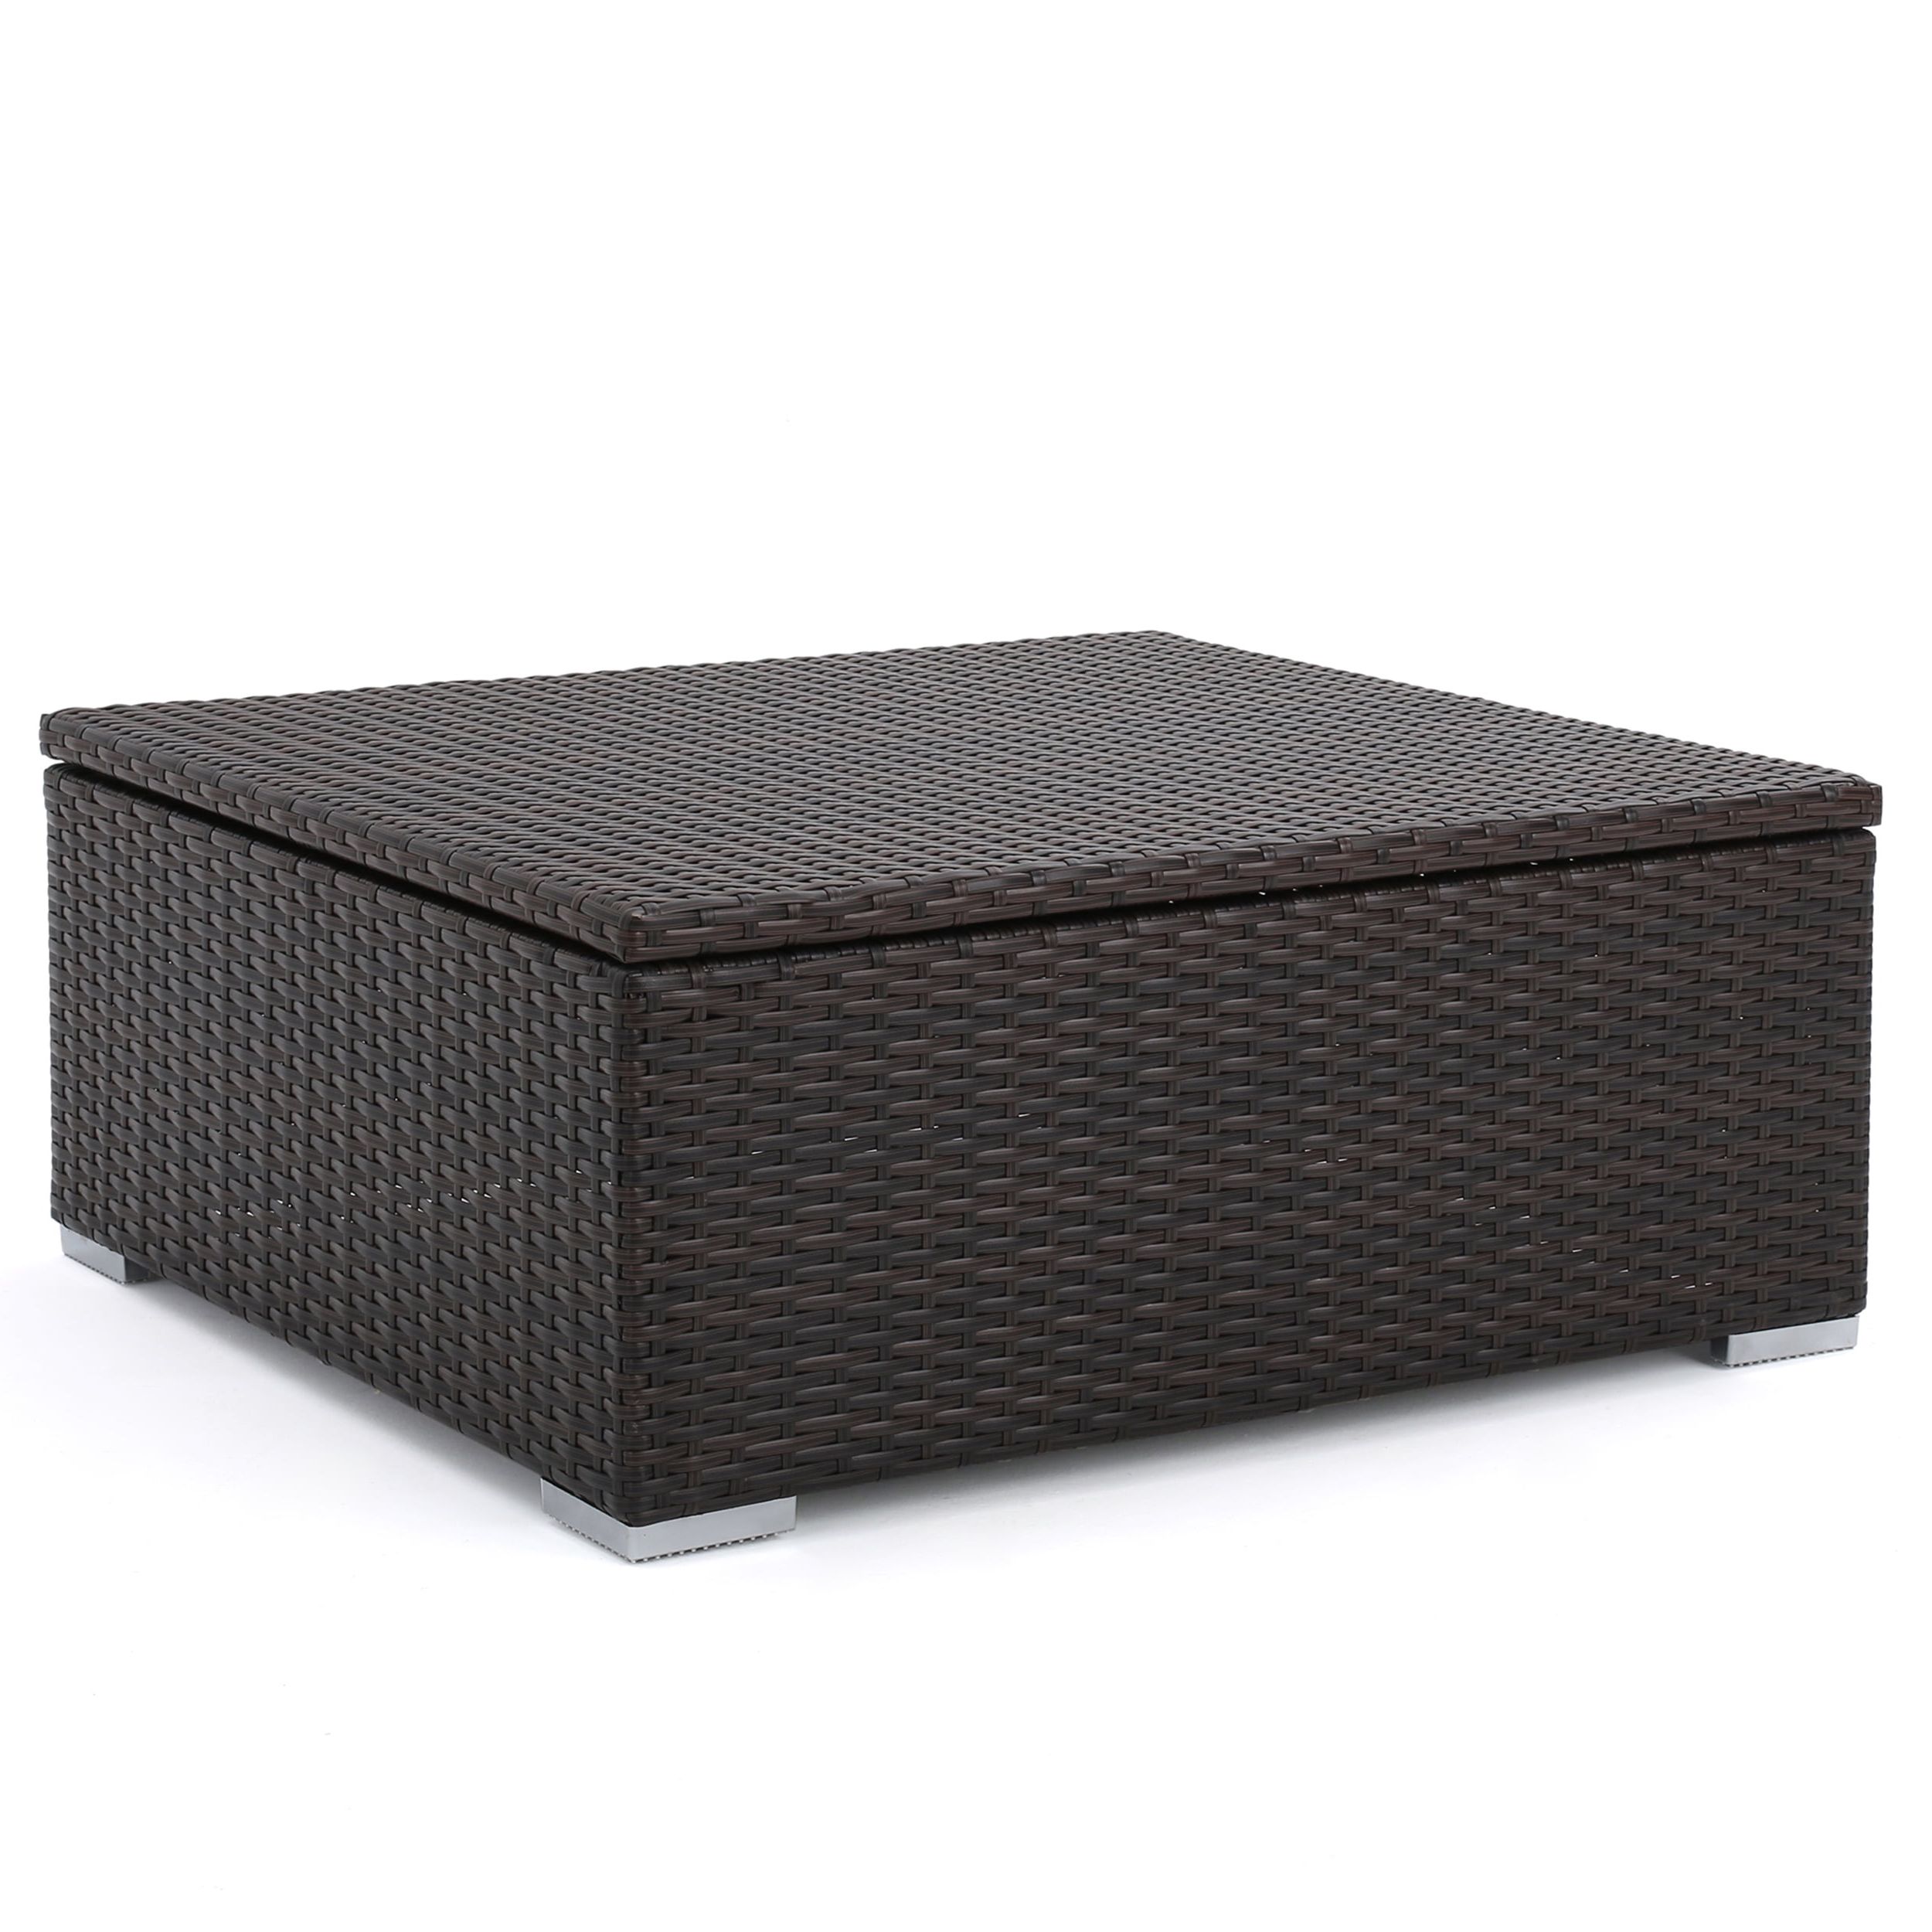 Costa Mesa Outdoor Wicker Coffee Table With Storage, Multibrown With Waterproof Coffee Tables (Gallery 5 of 20)